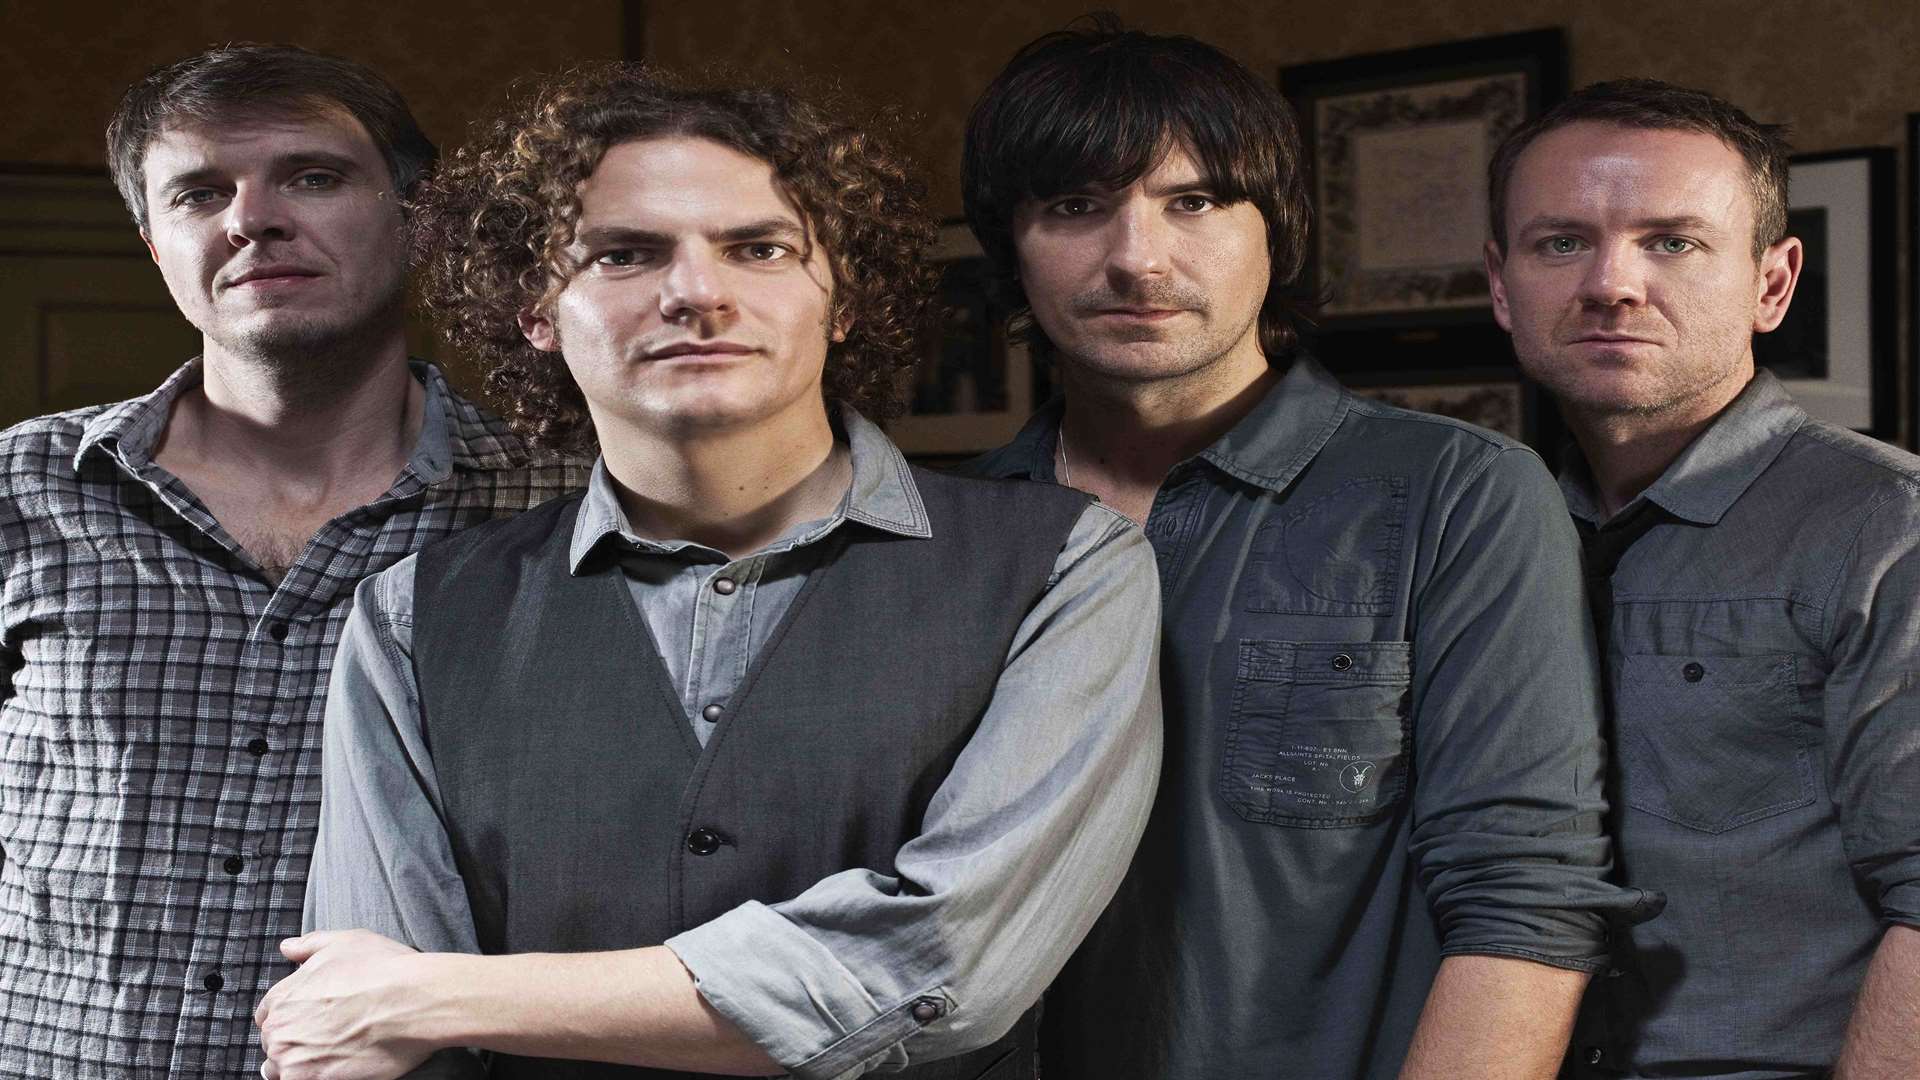 Toploader will appear at the new Kent Life boutique festival